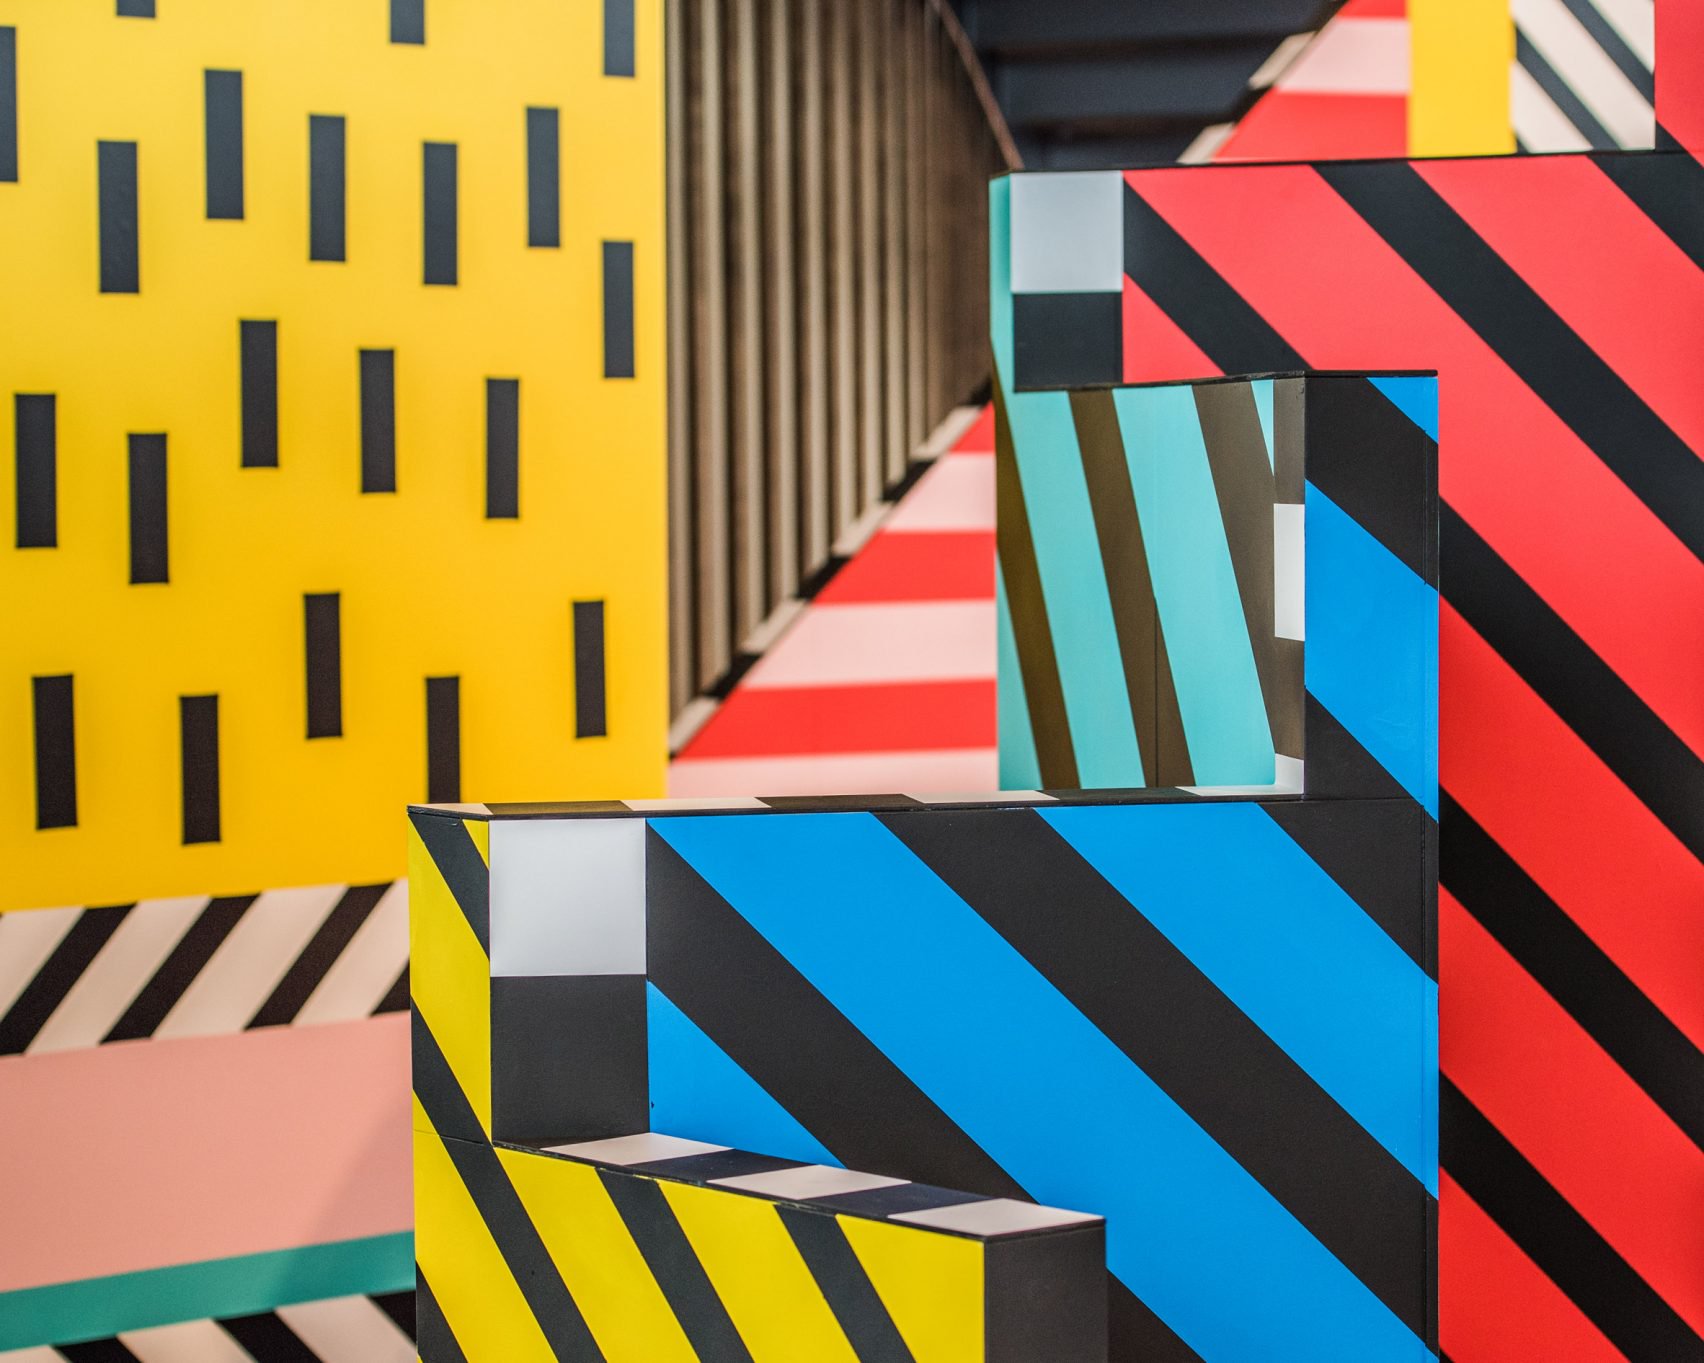 camille-walala-play-installation-now-gallery-london_